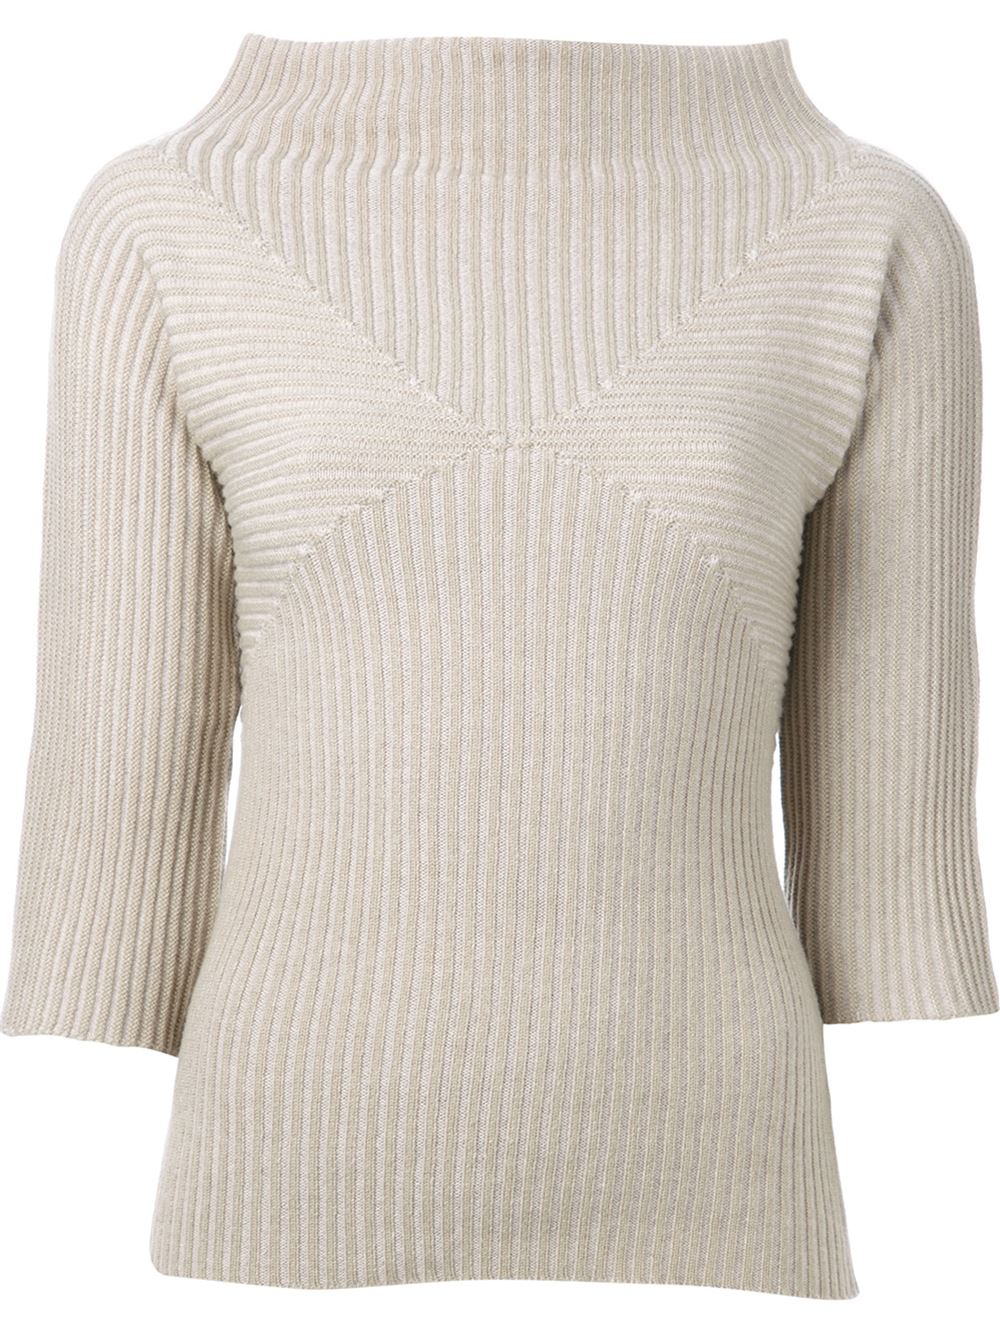 Lyst - Armani Ribbed High Neck Sweater in Natural